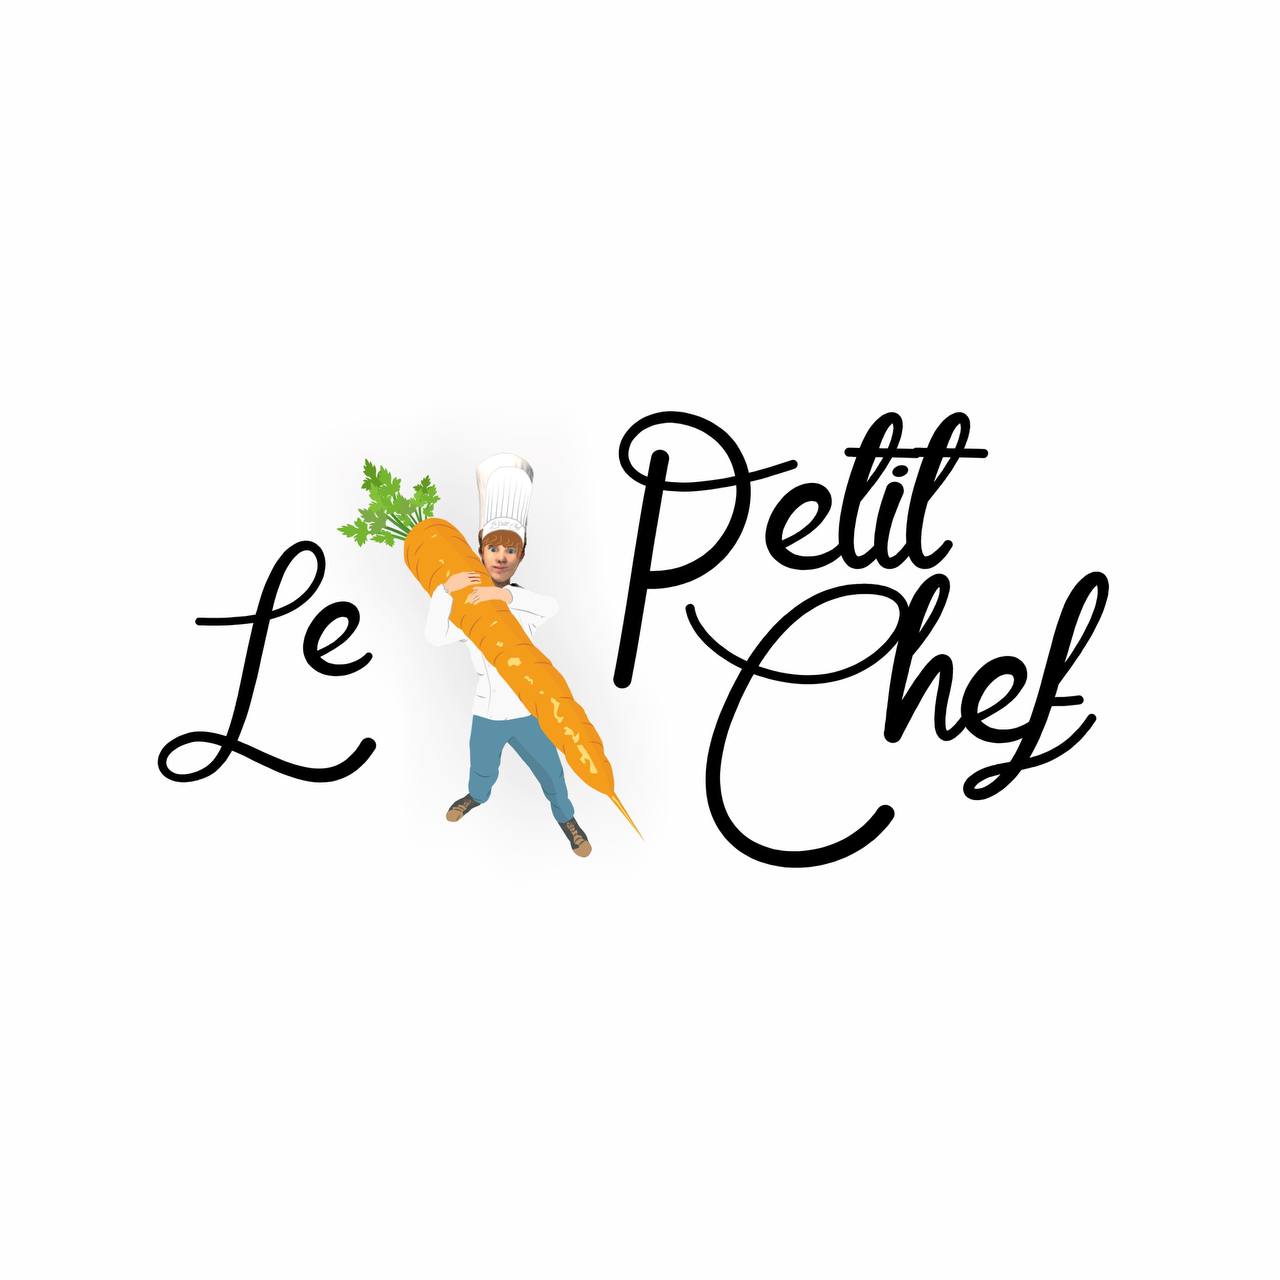 Le Petit Chef at Ray’s Grill - Coming Soon in UAE